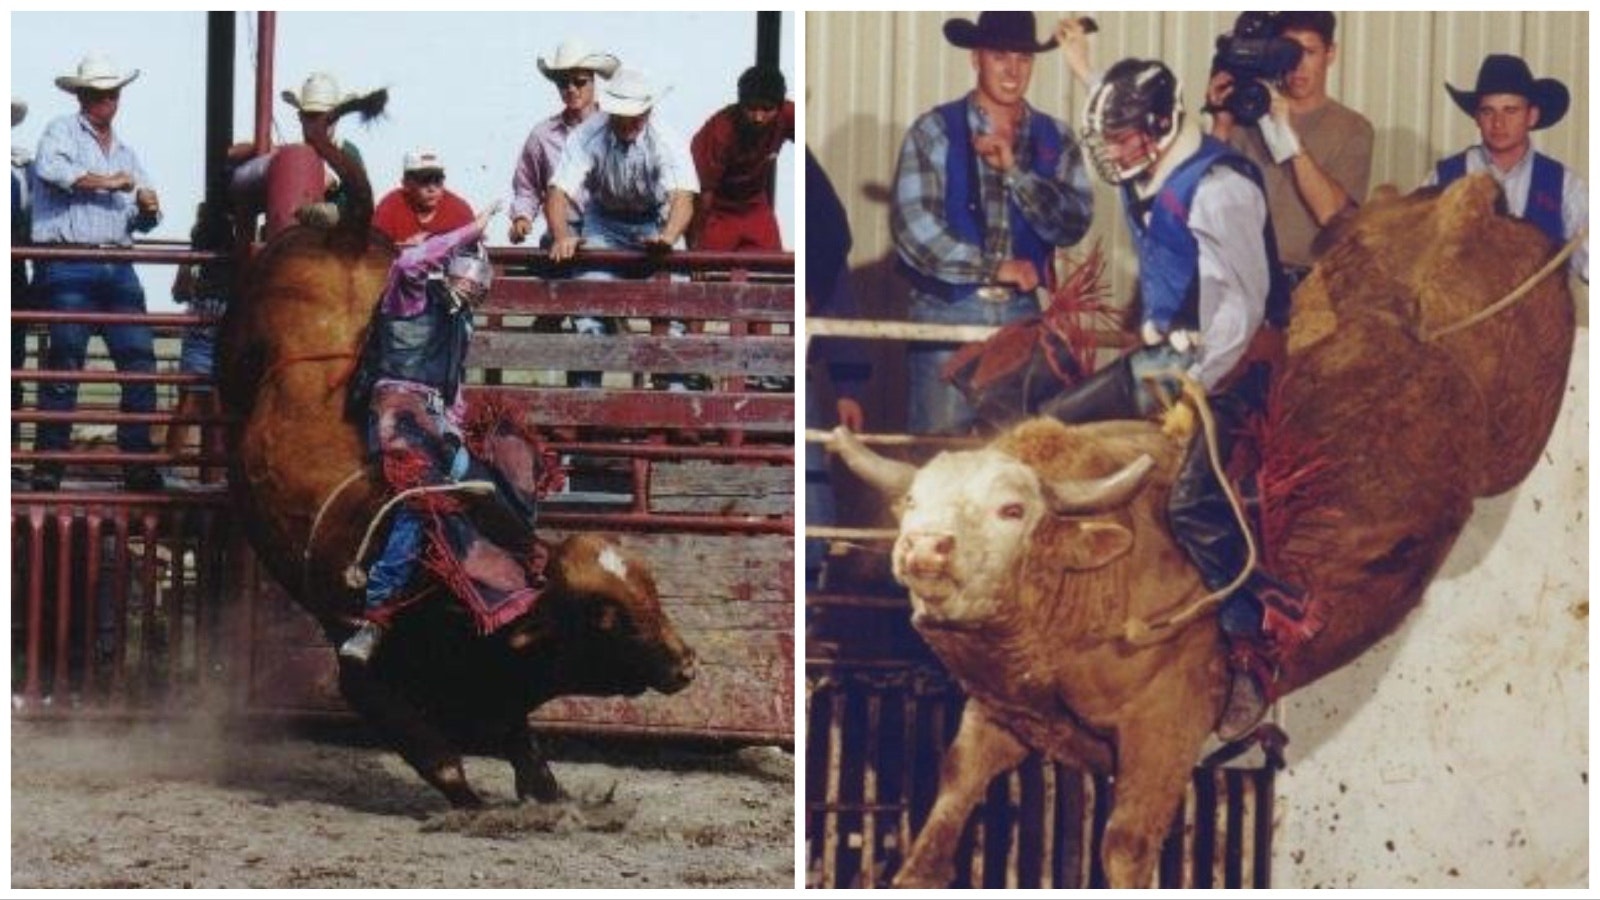 Nick Morrison had a promising career as a professional bull rider before injuries derailed that career path.